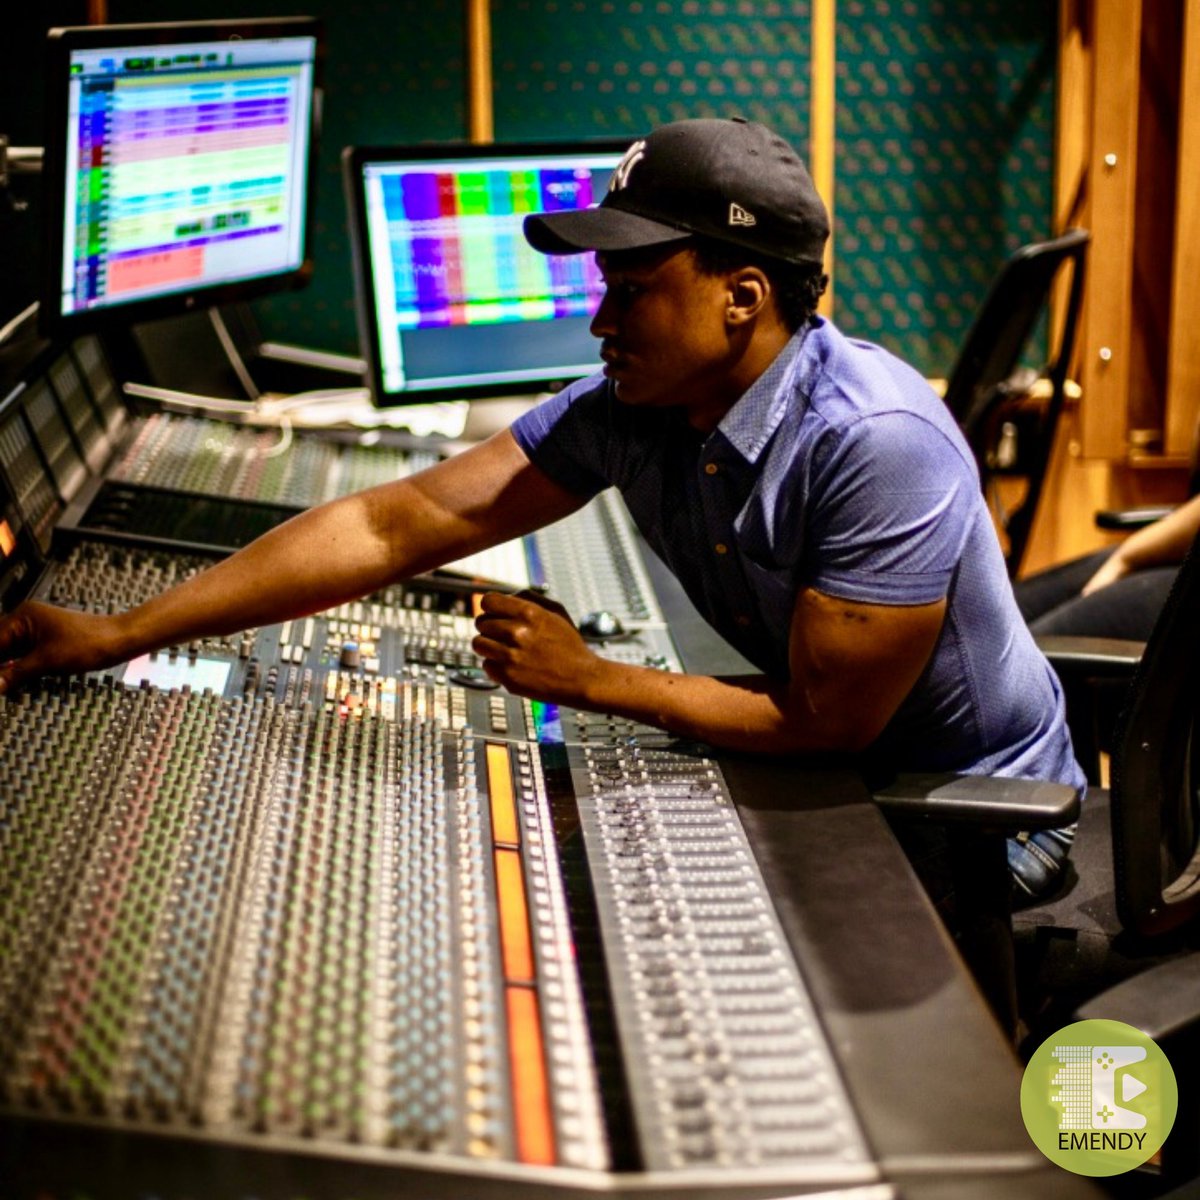 It's weekend time! Happy #faderfriday😁

Remember to join us at our Virtual Open Day tomorrow!🤩

Book your free spot here: quiz.emendy.co.za/virtual-openda…

#emendyinstitute #highereducation #musictechnology #musicproduction #gamedev #gamedesign #virtual #openday2020 #joinus #studymusic